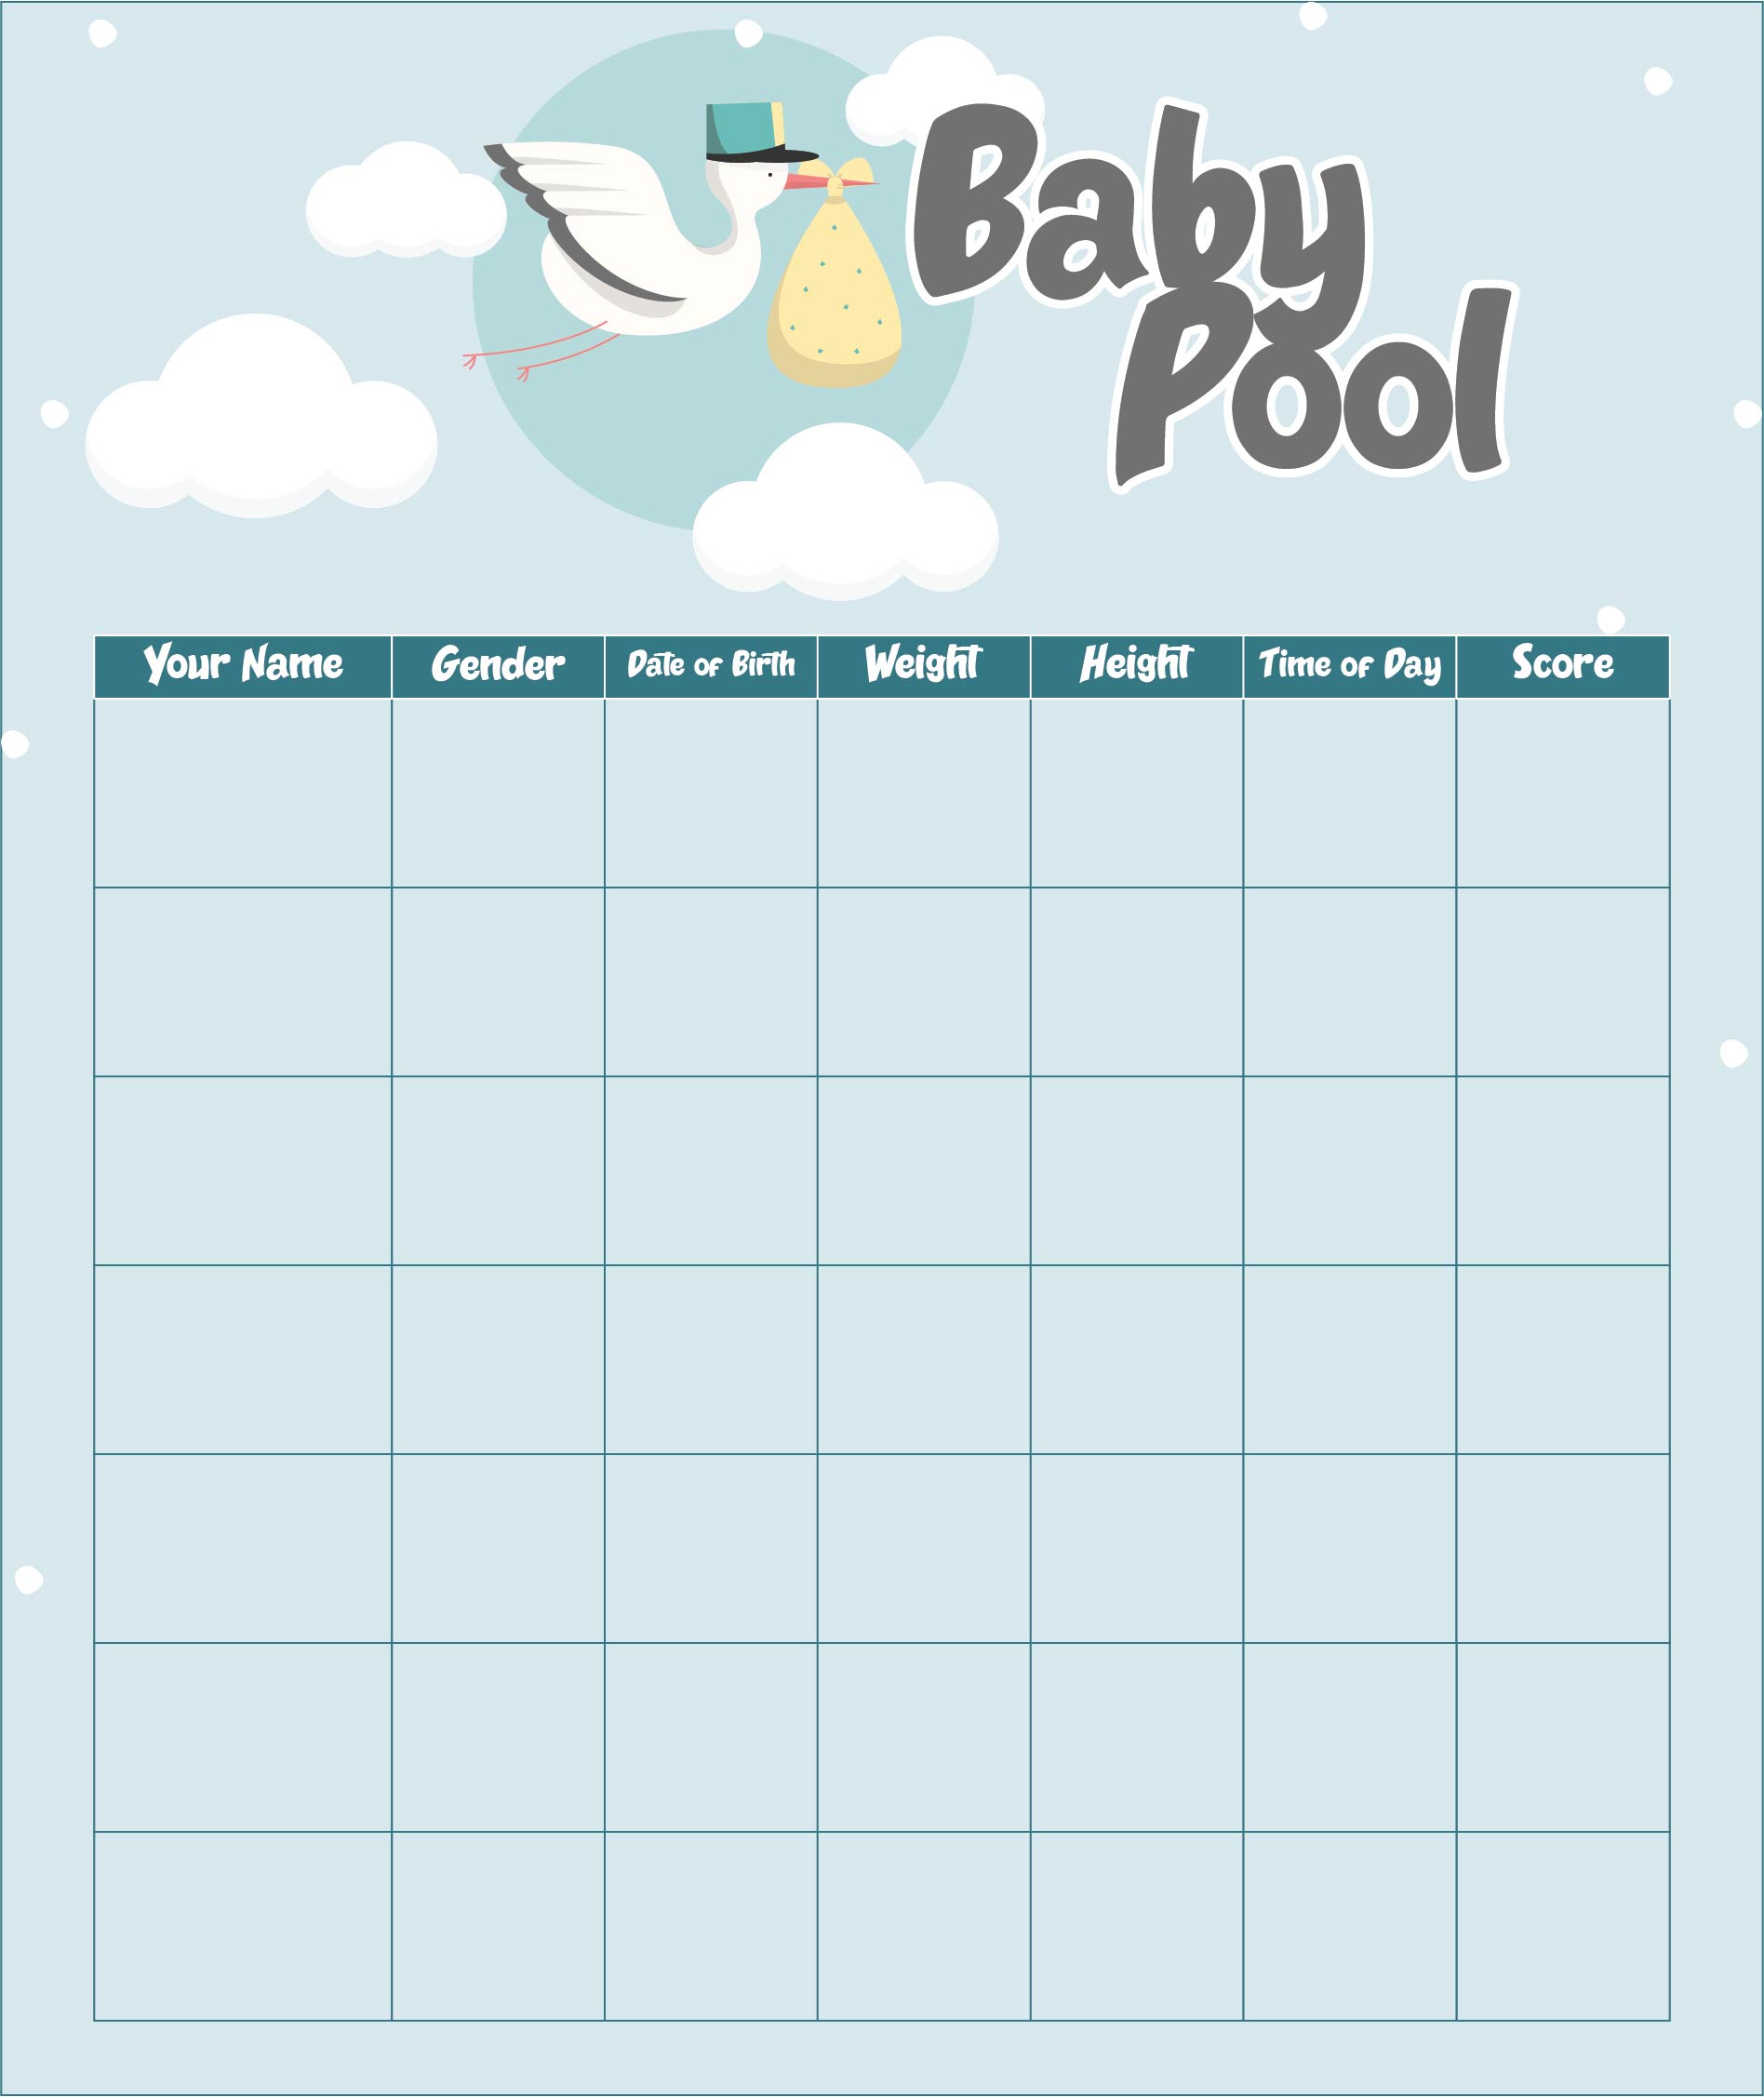 guess the baby weight and date template 1